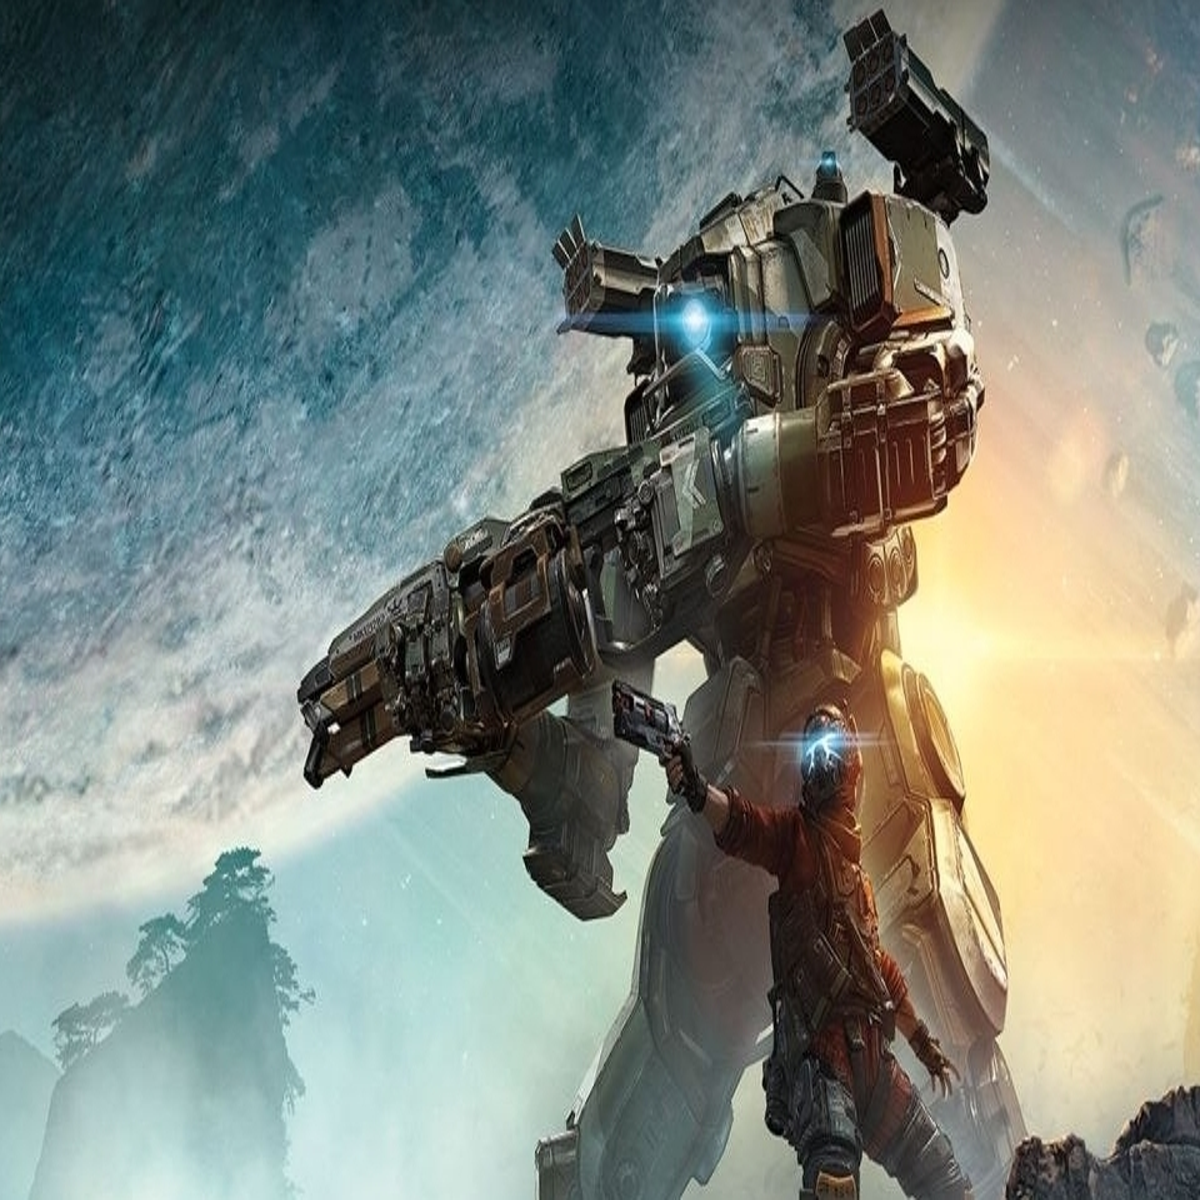 Titanfall 2 Servers Hit By Hackers, Respawn Has '1-2' People Working On A  Security Fix - Game Informer